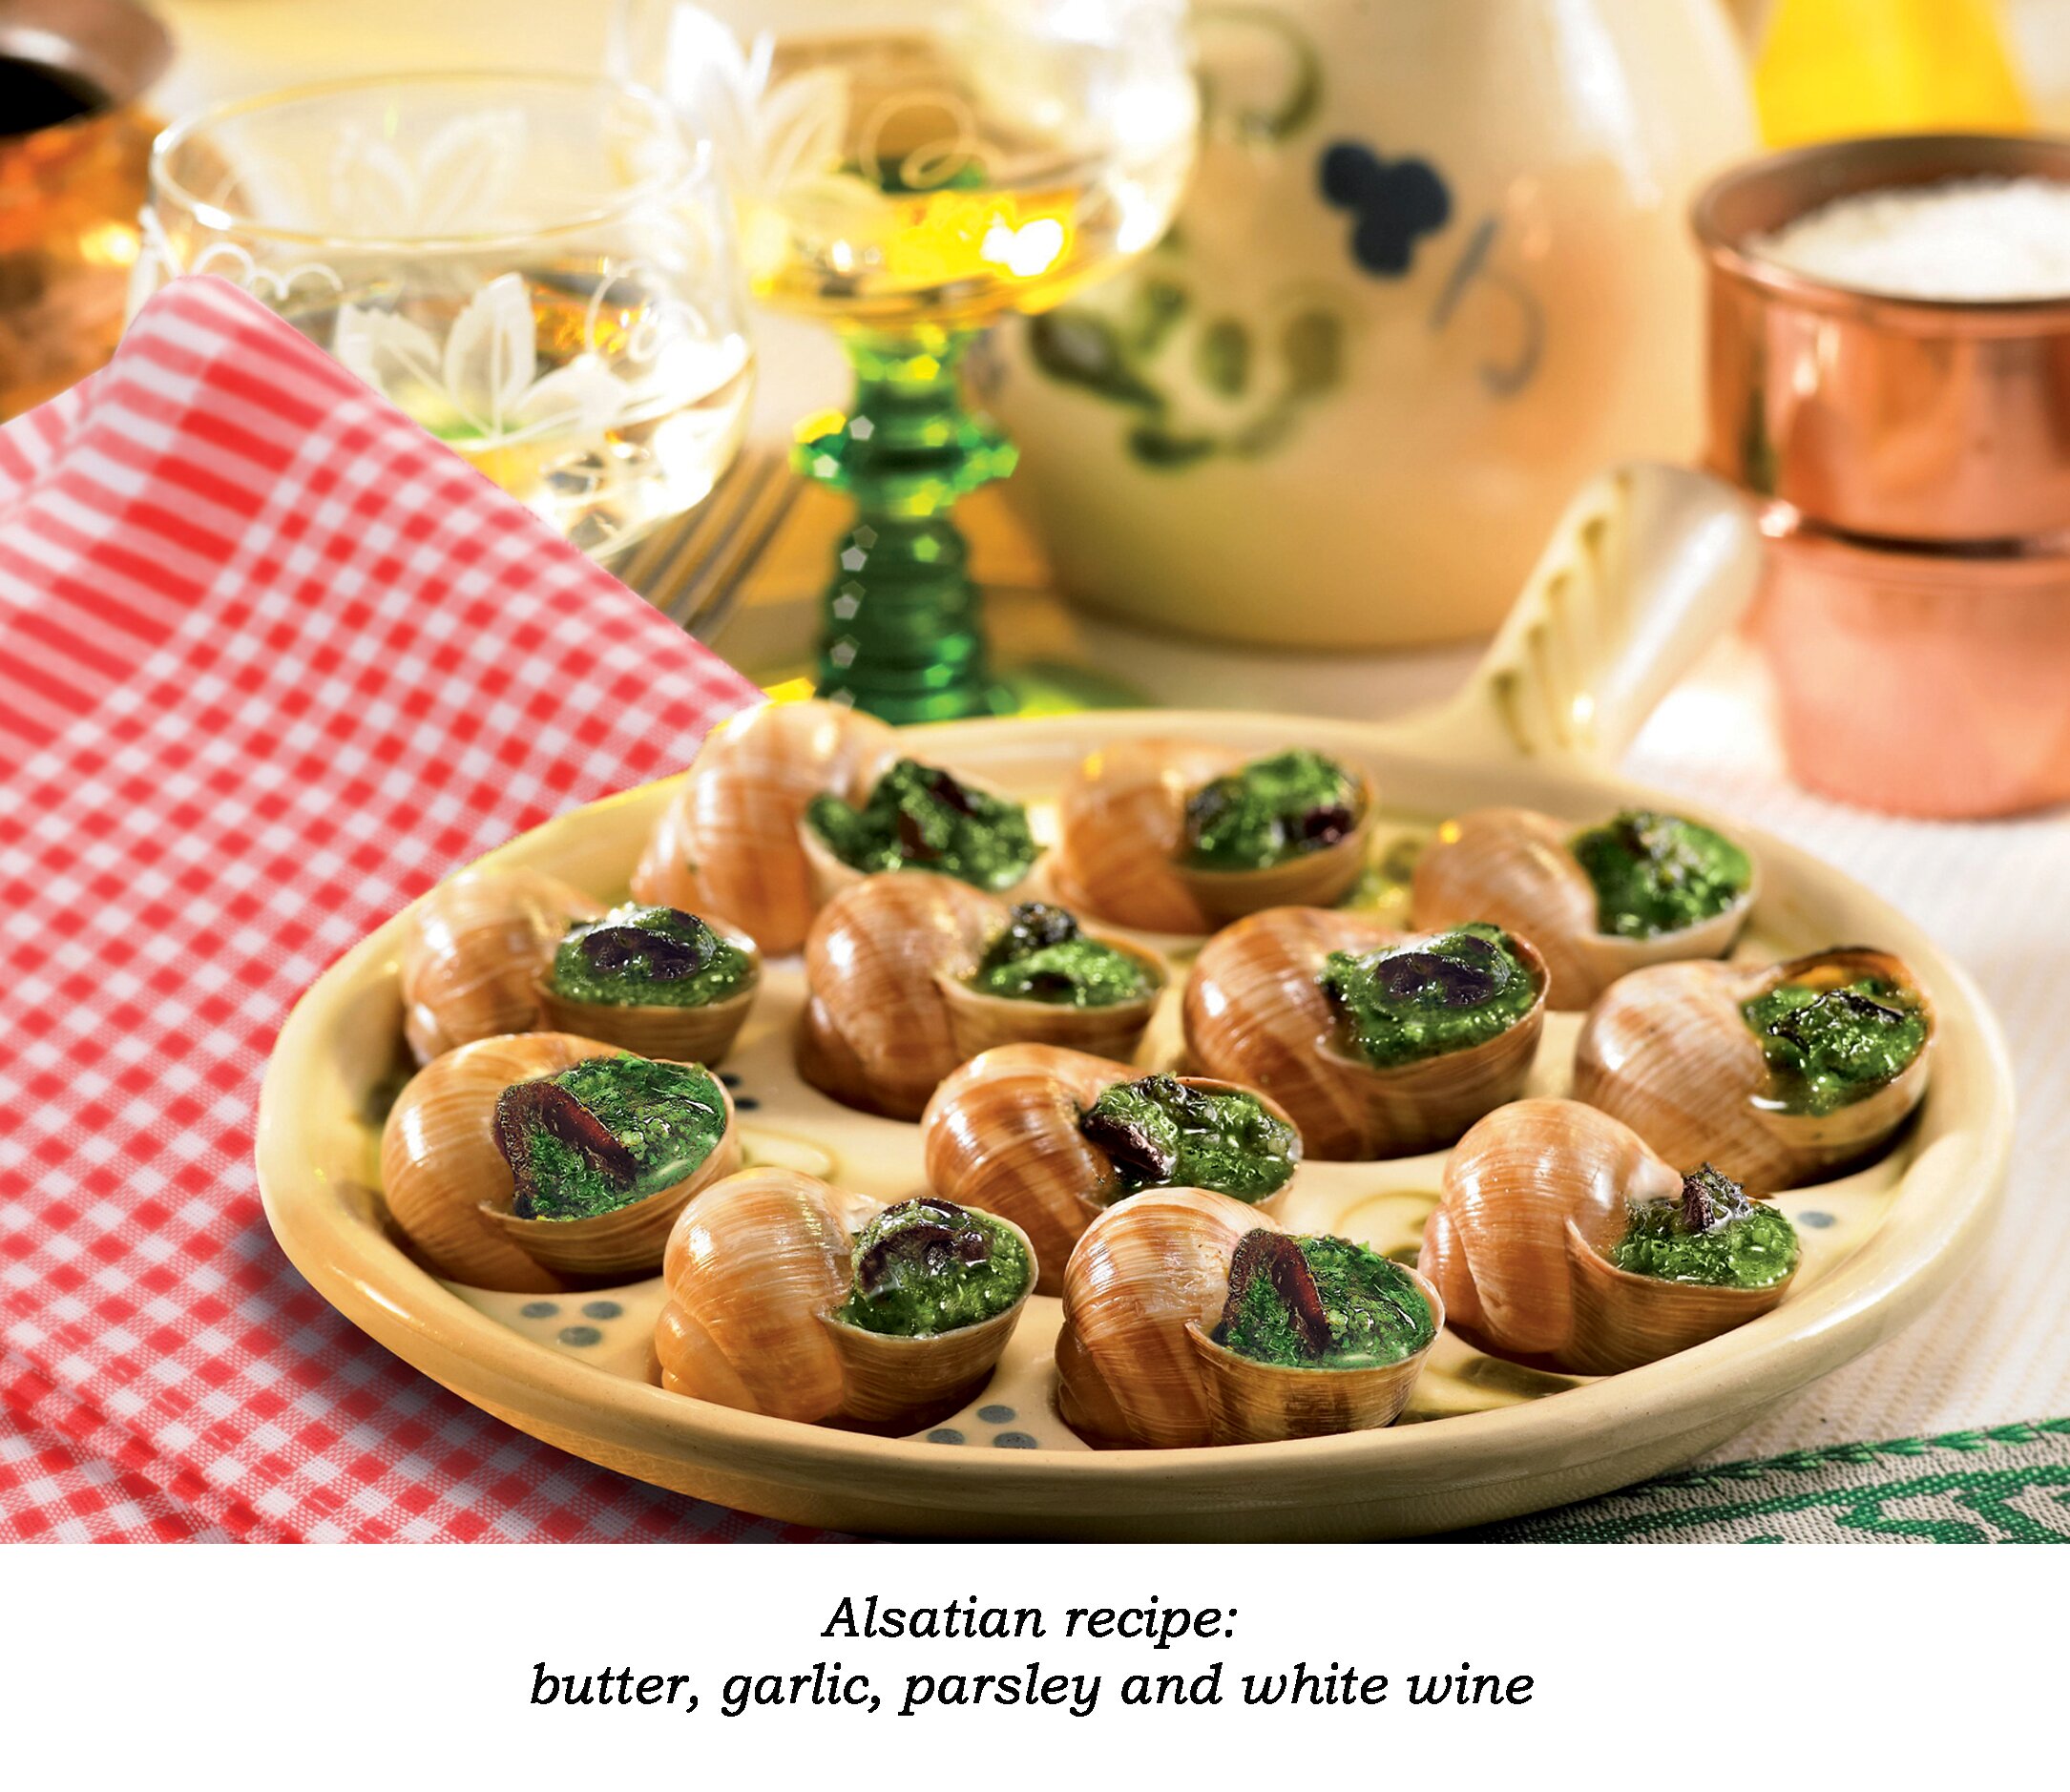 A wooden plate placed on a red-white plaid napkin with some escargots Alsatian recipe. Decorated with a glass of white wine